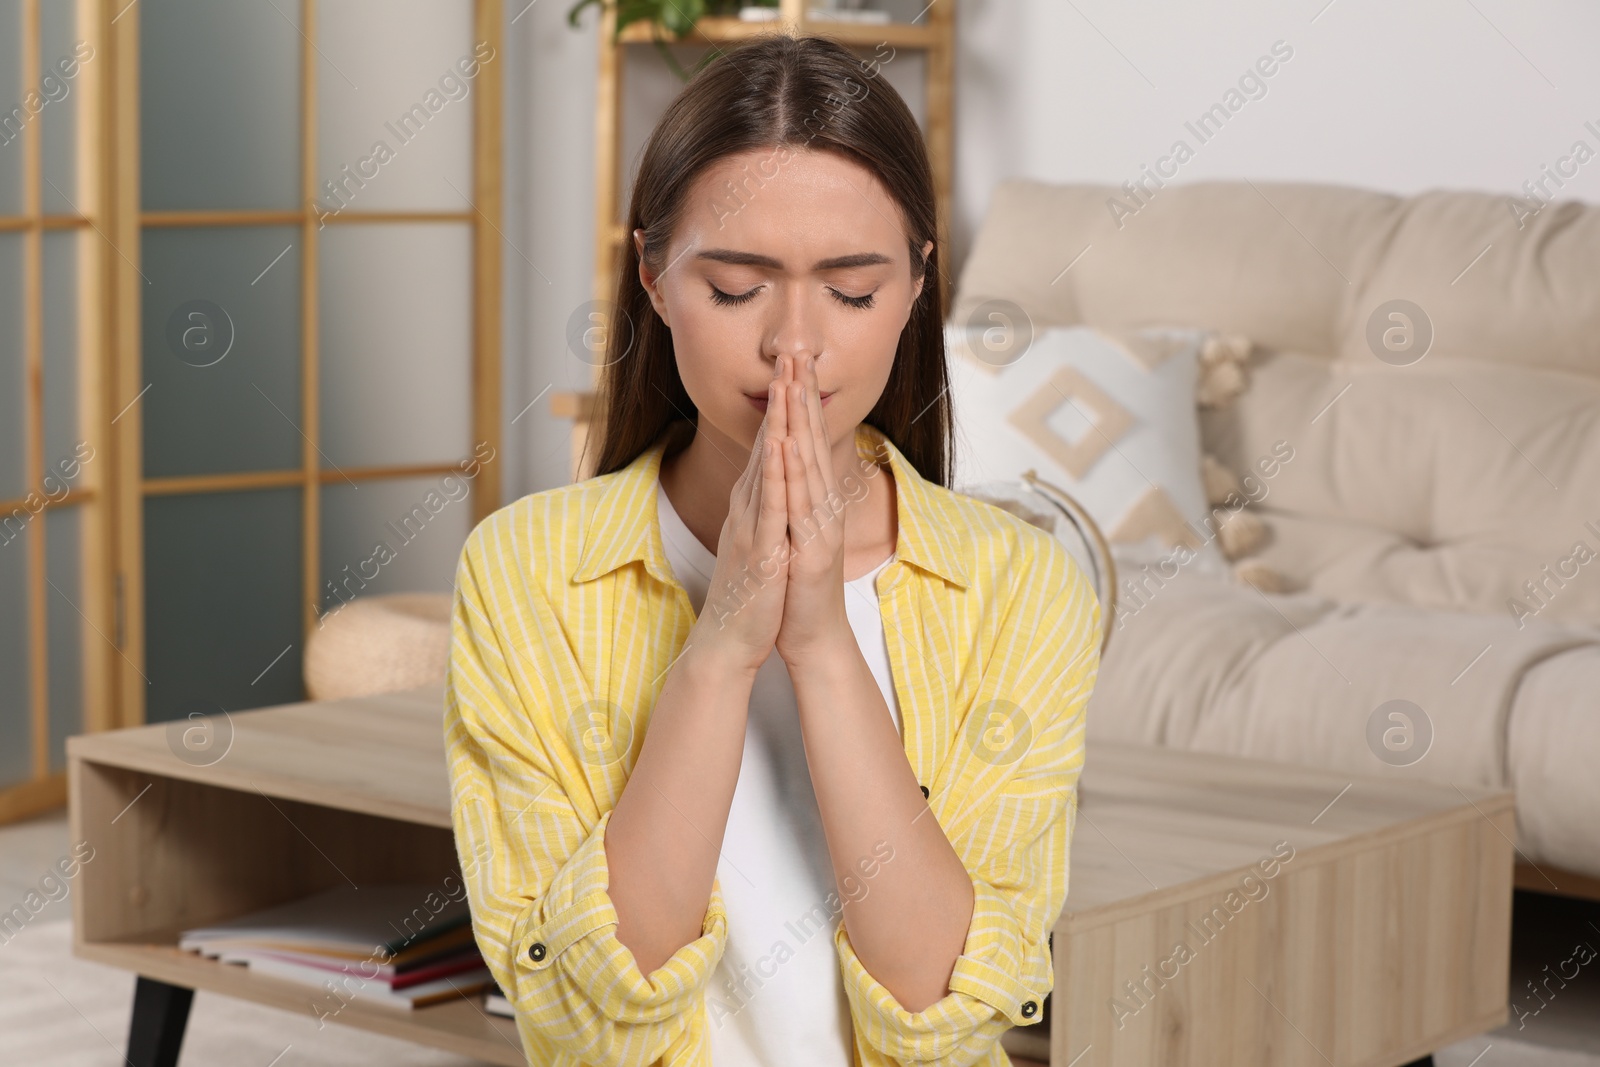 Photo of Woman with clasped hands praying at home